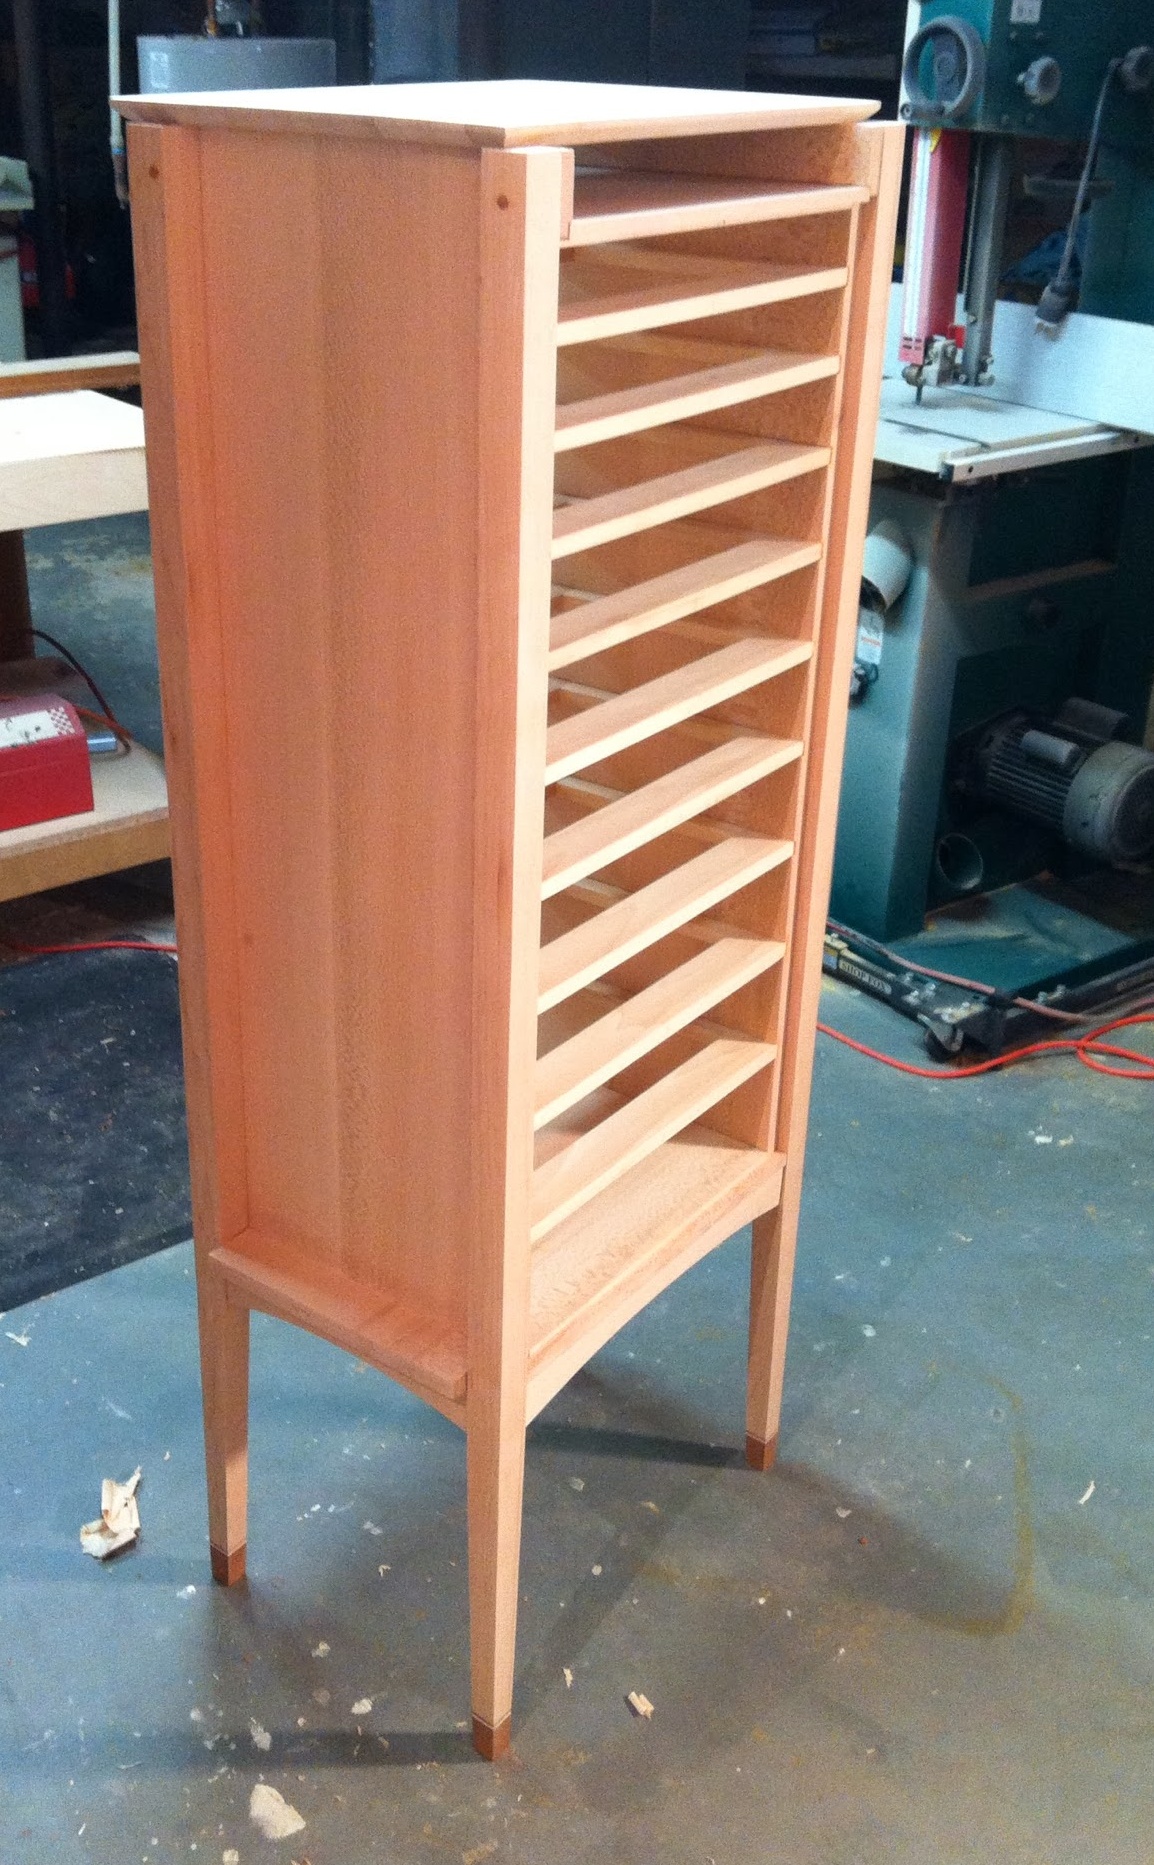 Rear view after the case glue-up. I'm starting to like her lines.